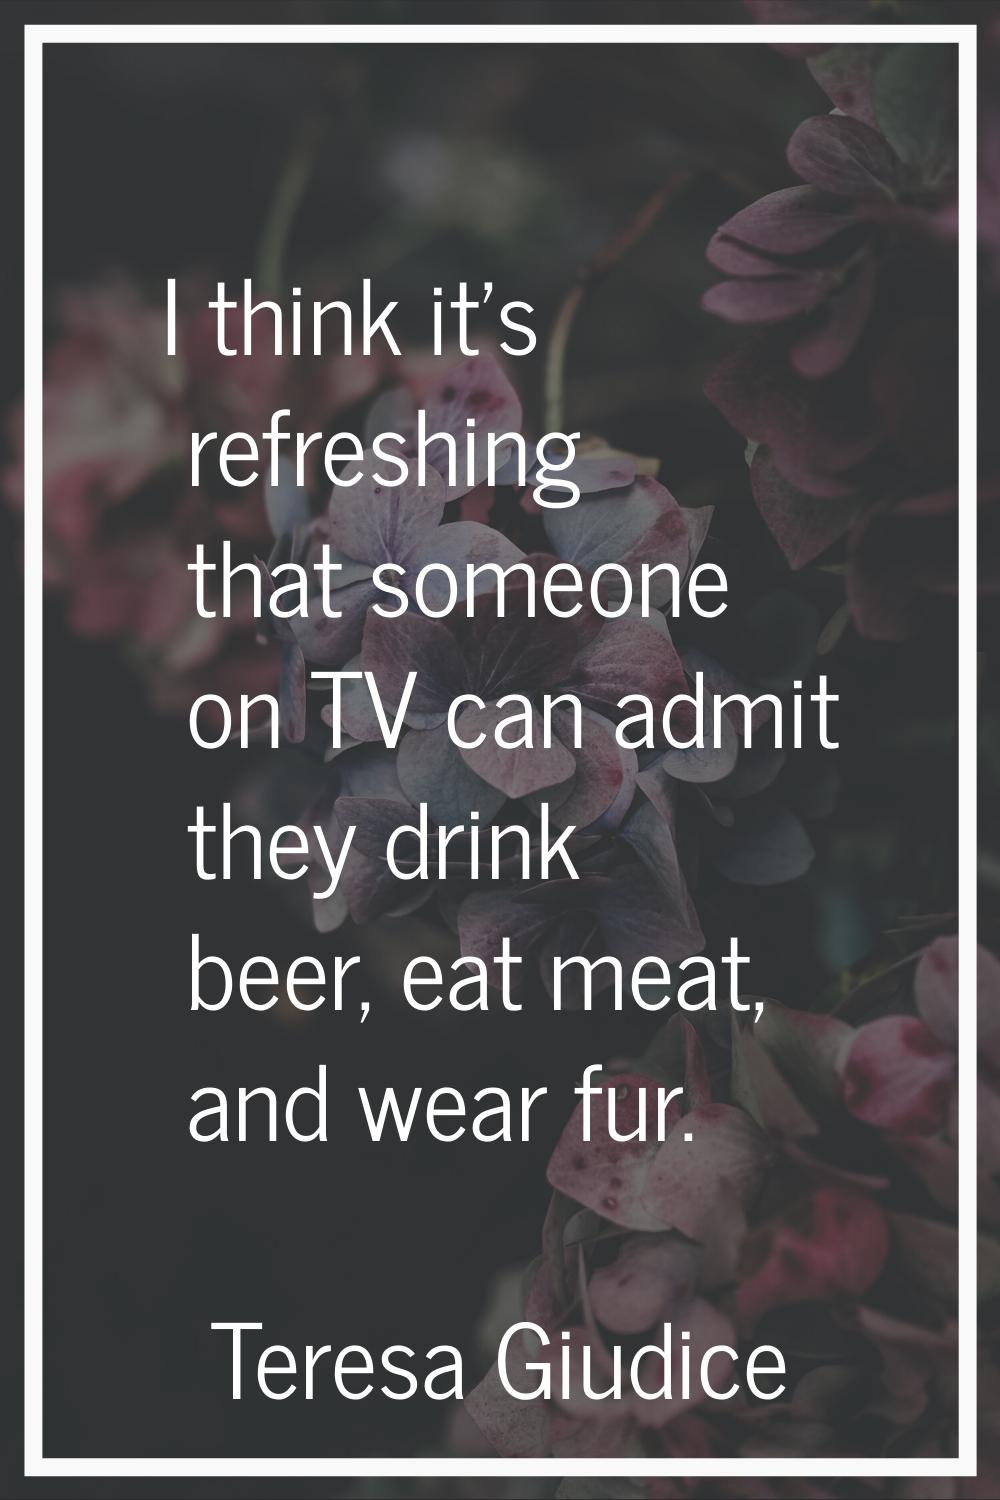 I think it's refreshing that someone on TV can admit they drink beer, eat meat, and wear fur.